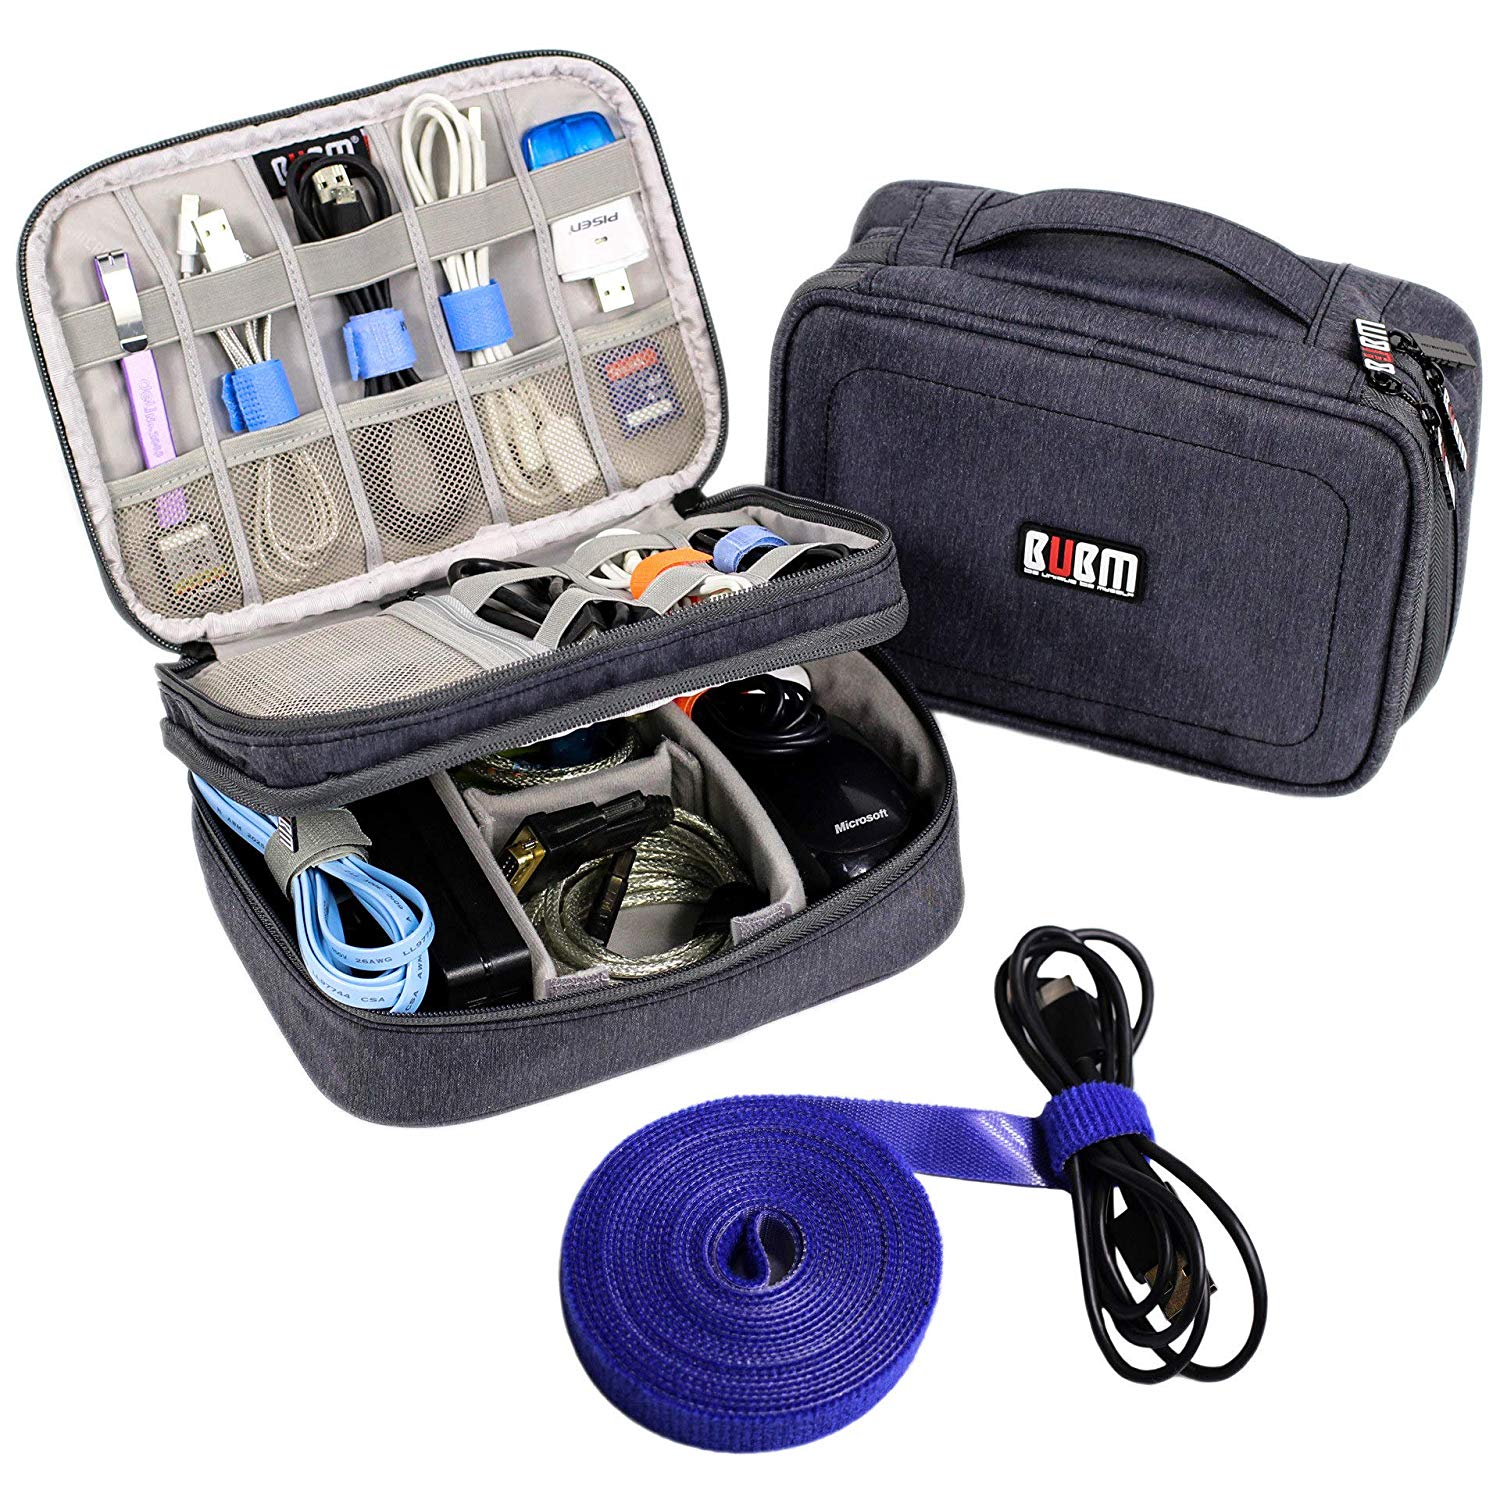 Electronics Organizer Travel Cable Cord Bag